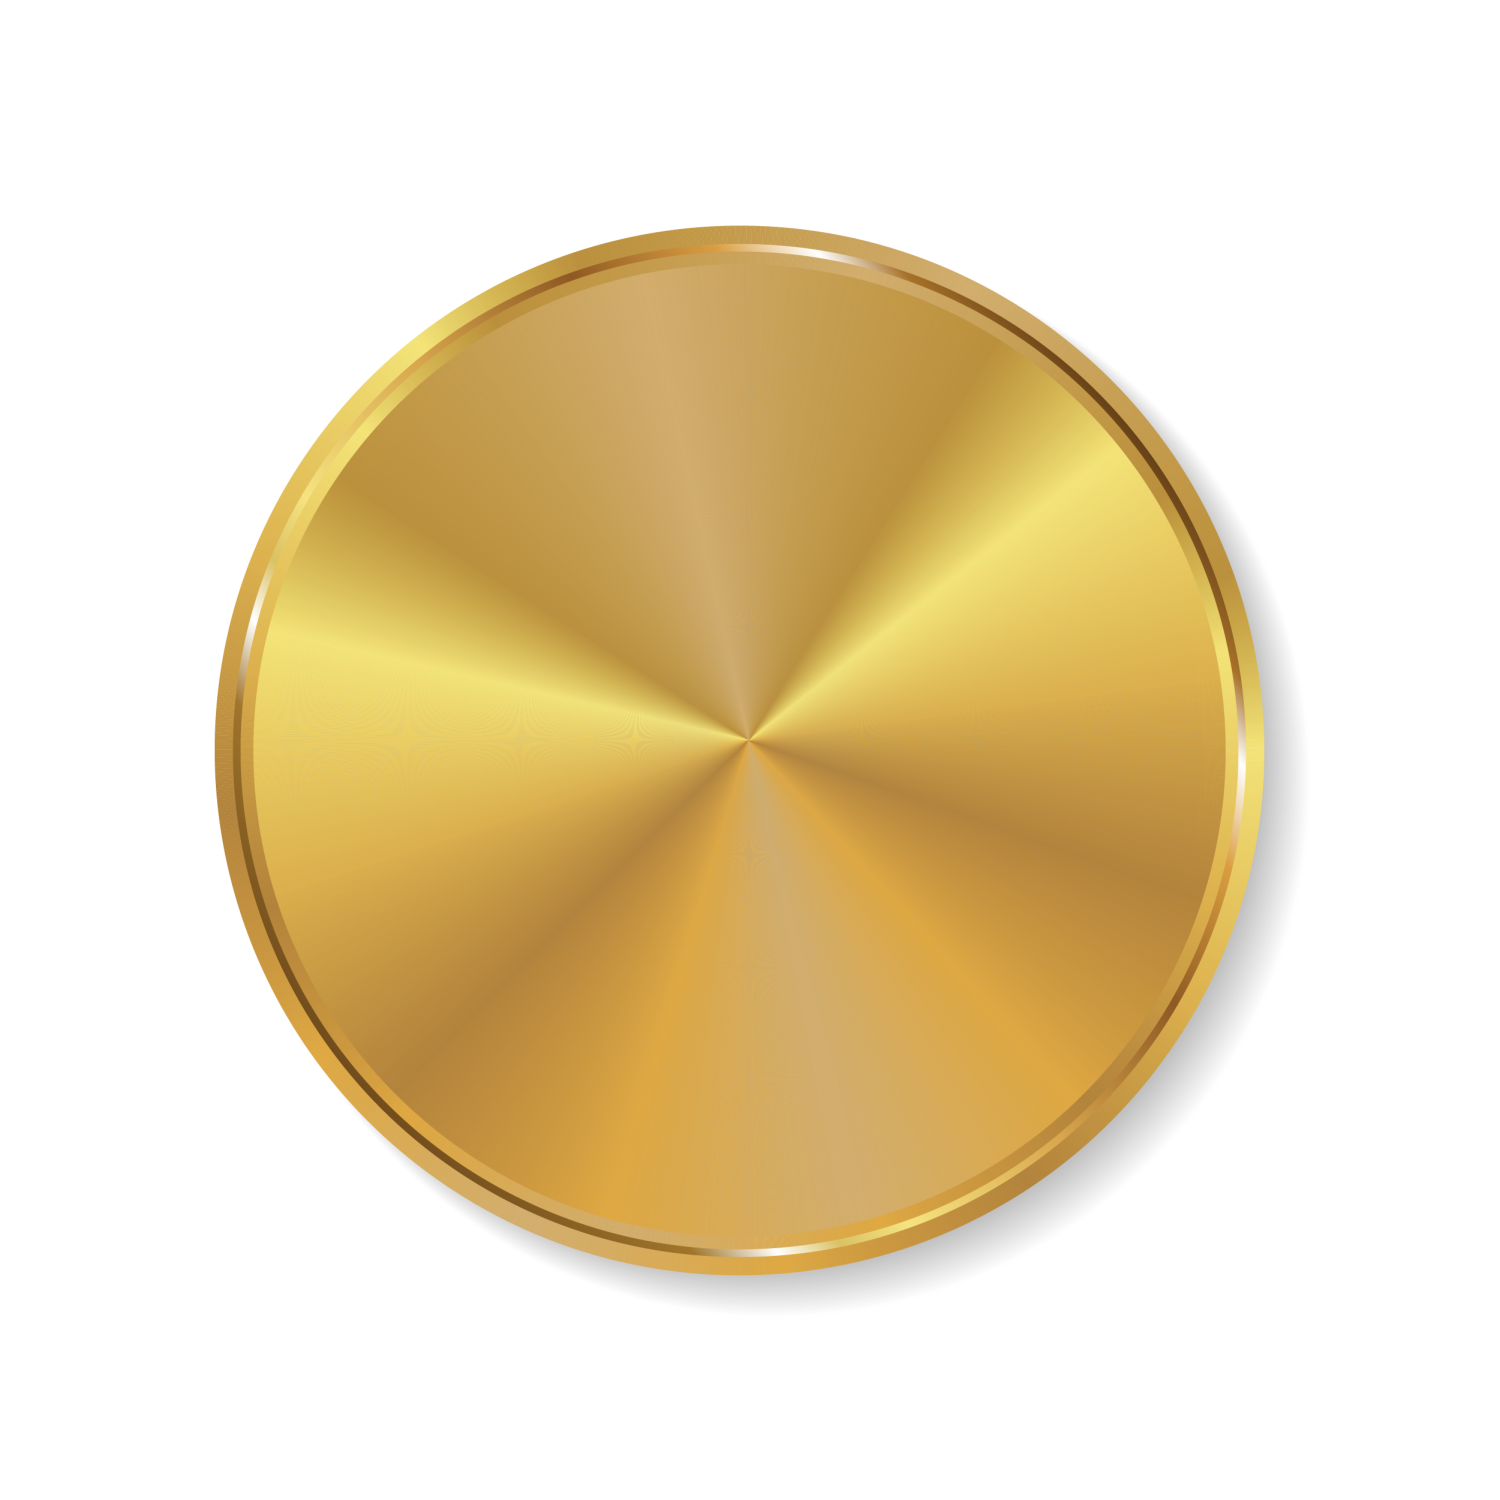 Luxury Golden Circle Png Download 15001500 Free Transparent Gold